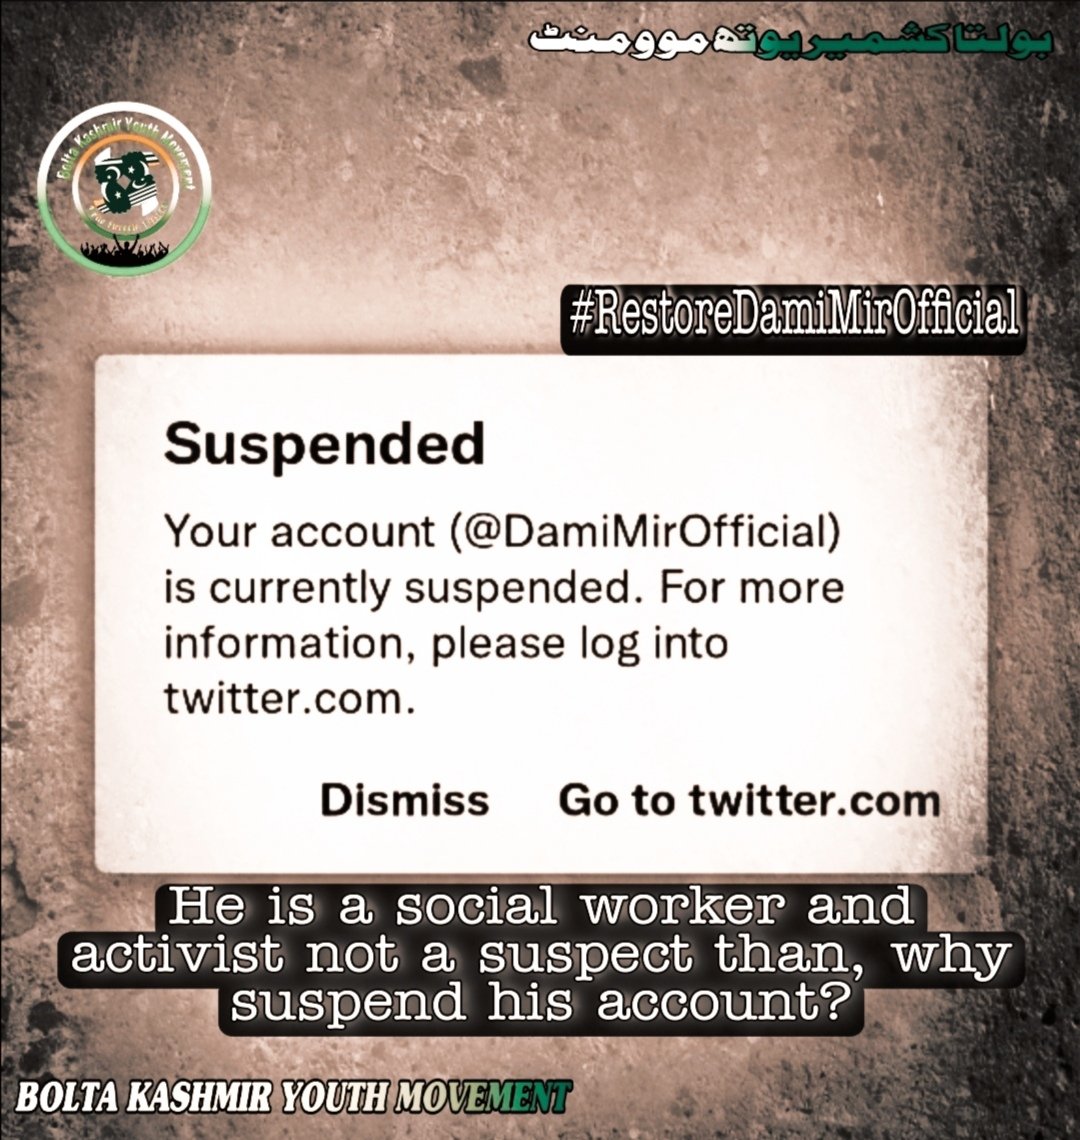 #RestoreDamiMirOfficial
The account of the respected head Of @BKYMofficial has been suspended, we all are appealing for the restoration of his account...i @DamiMirOfficial